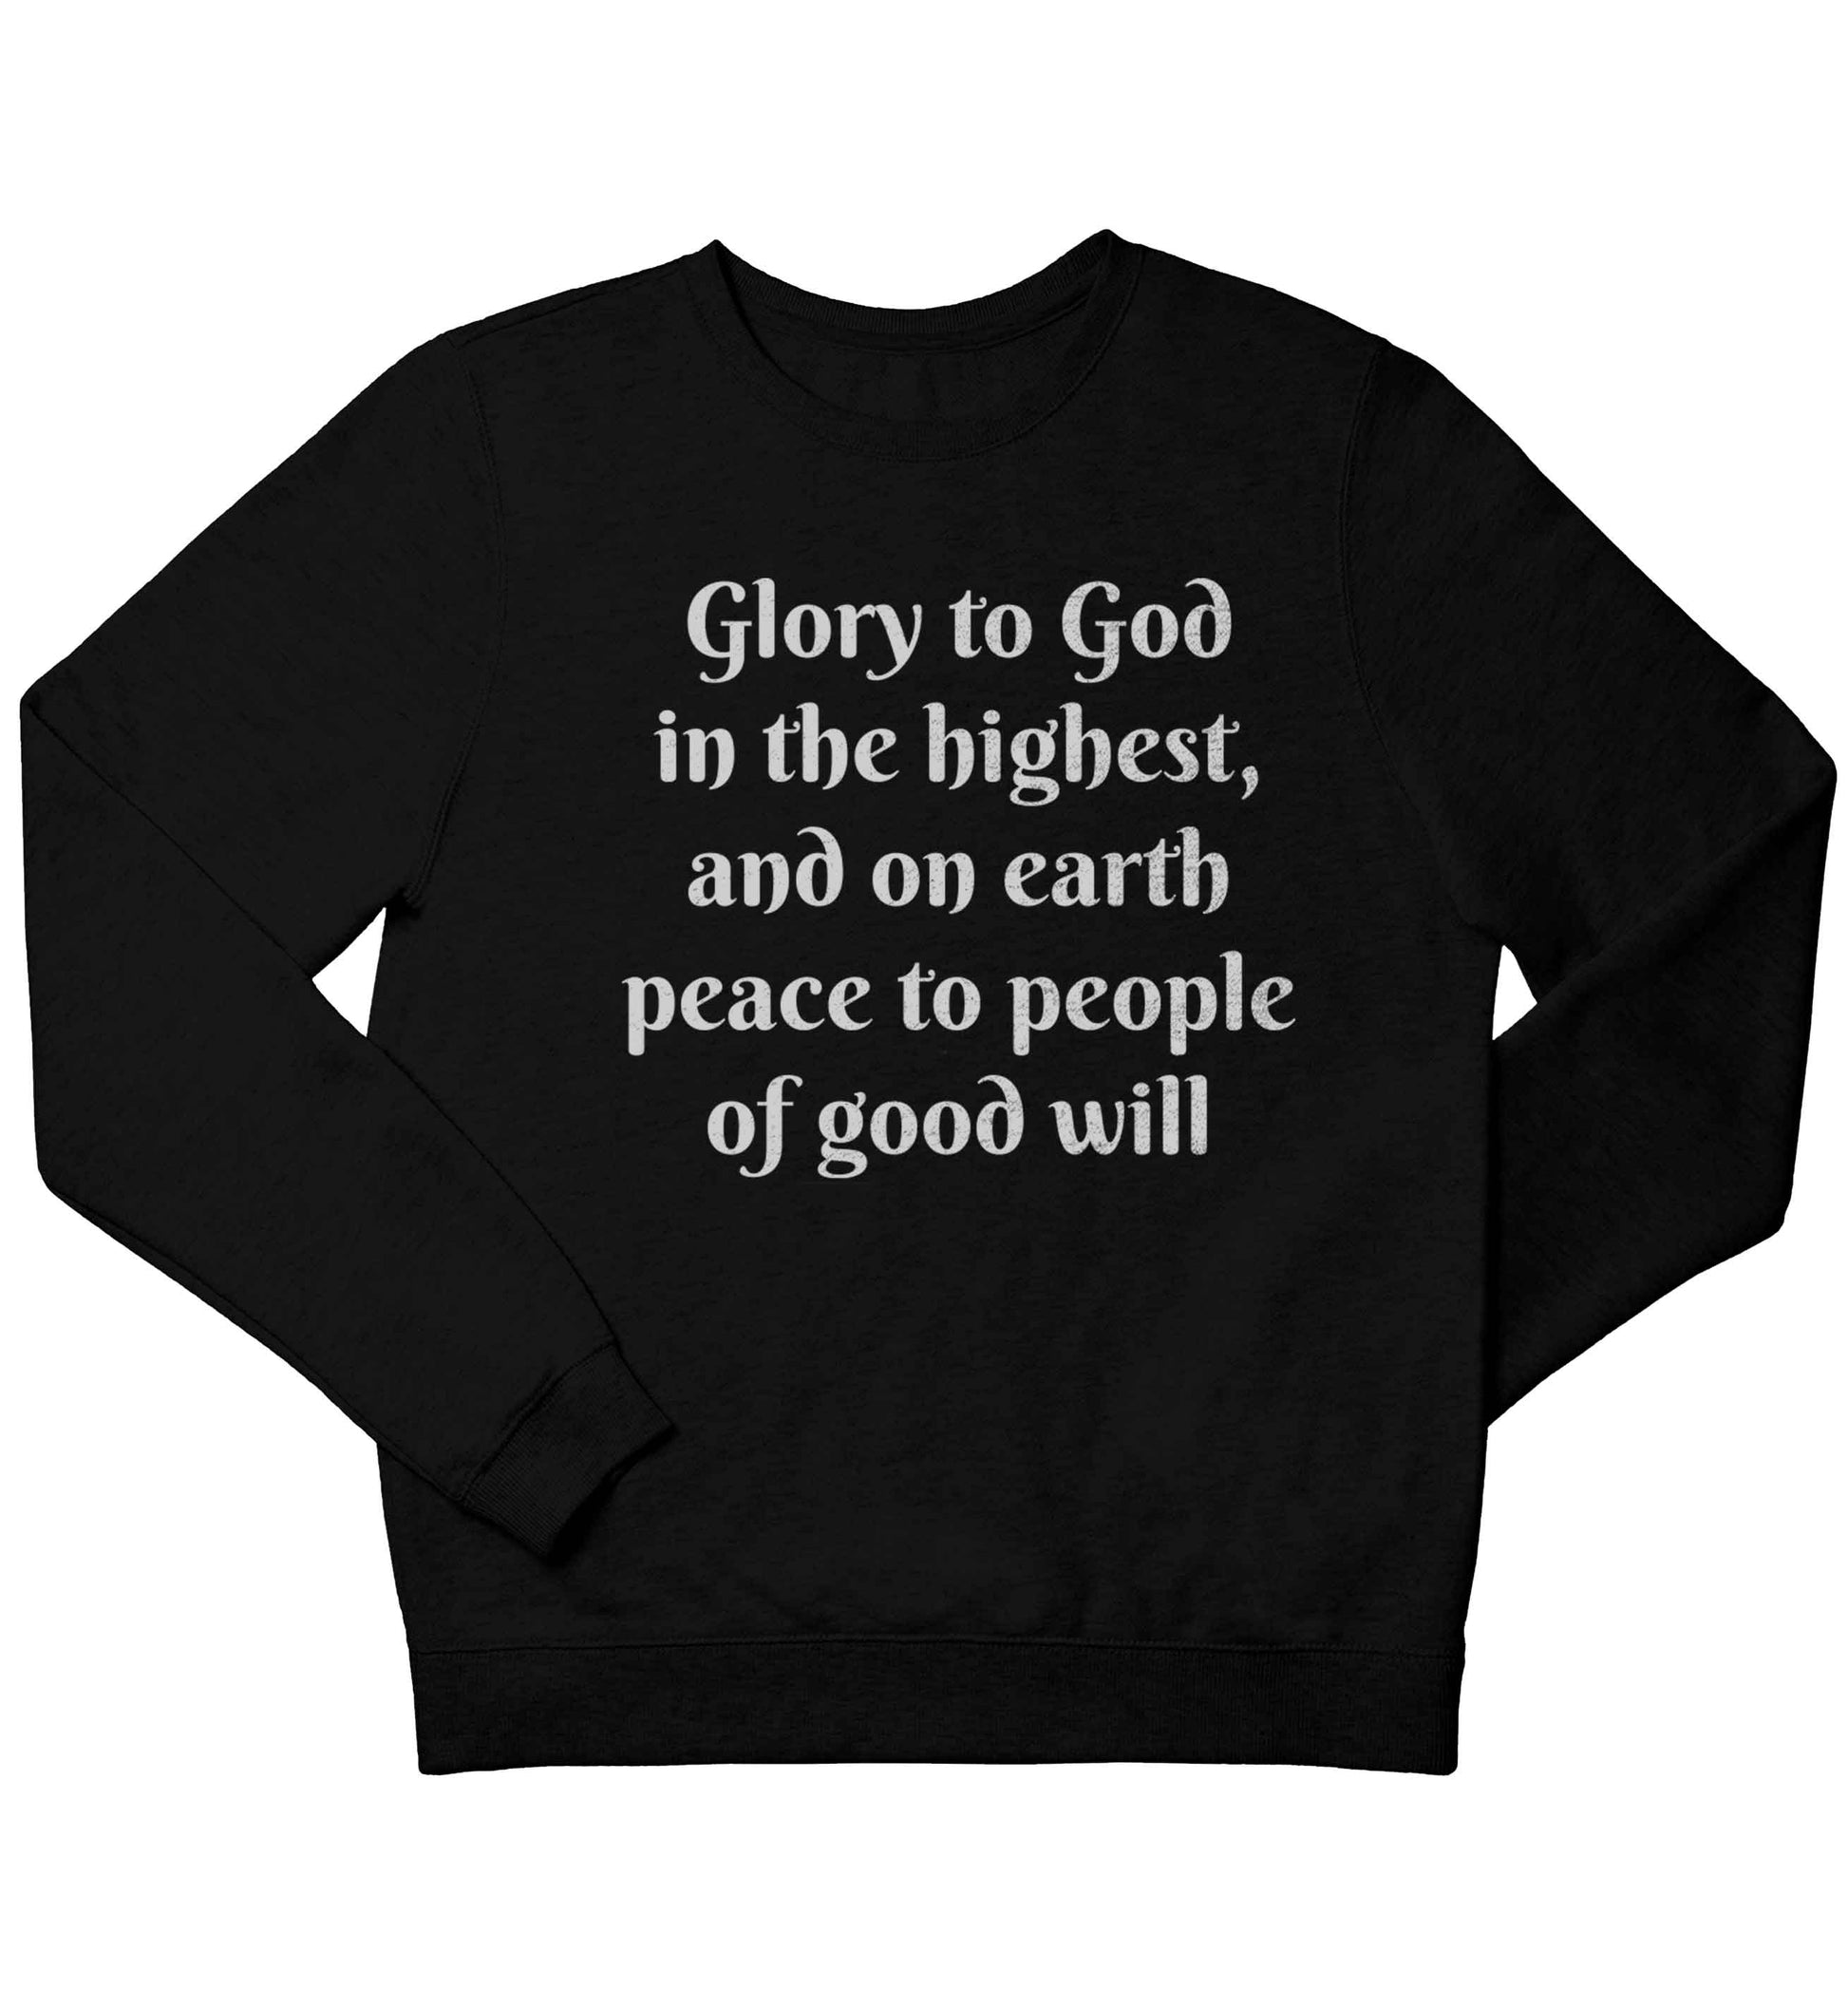 Glory to God in the highest, and on earth peace to people of good will children's black sweater 12-13 Years